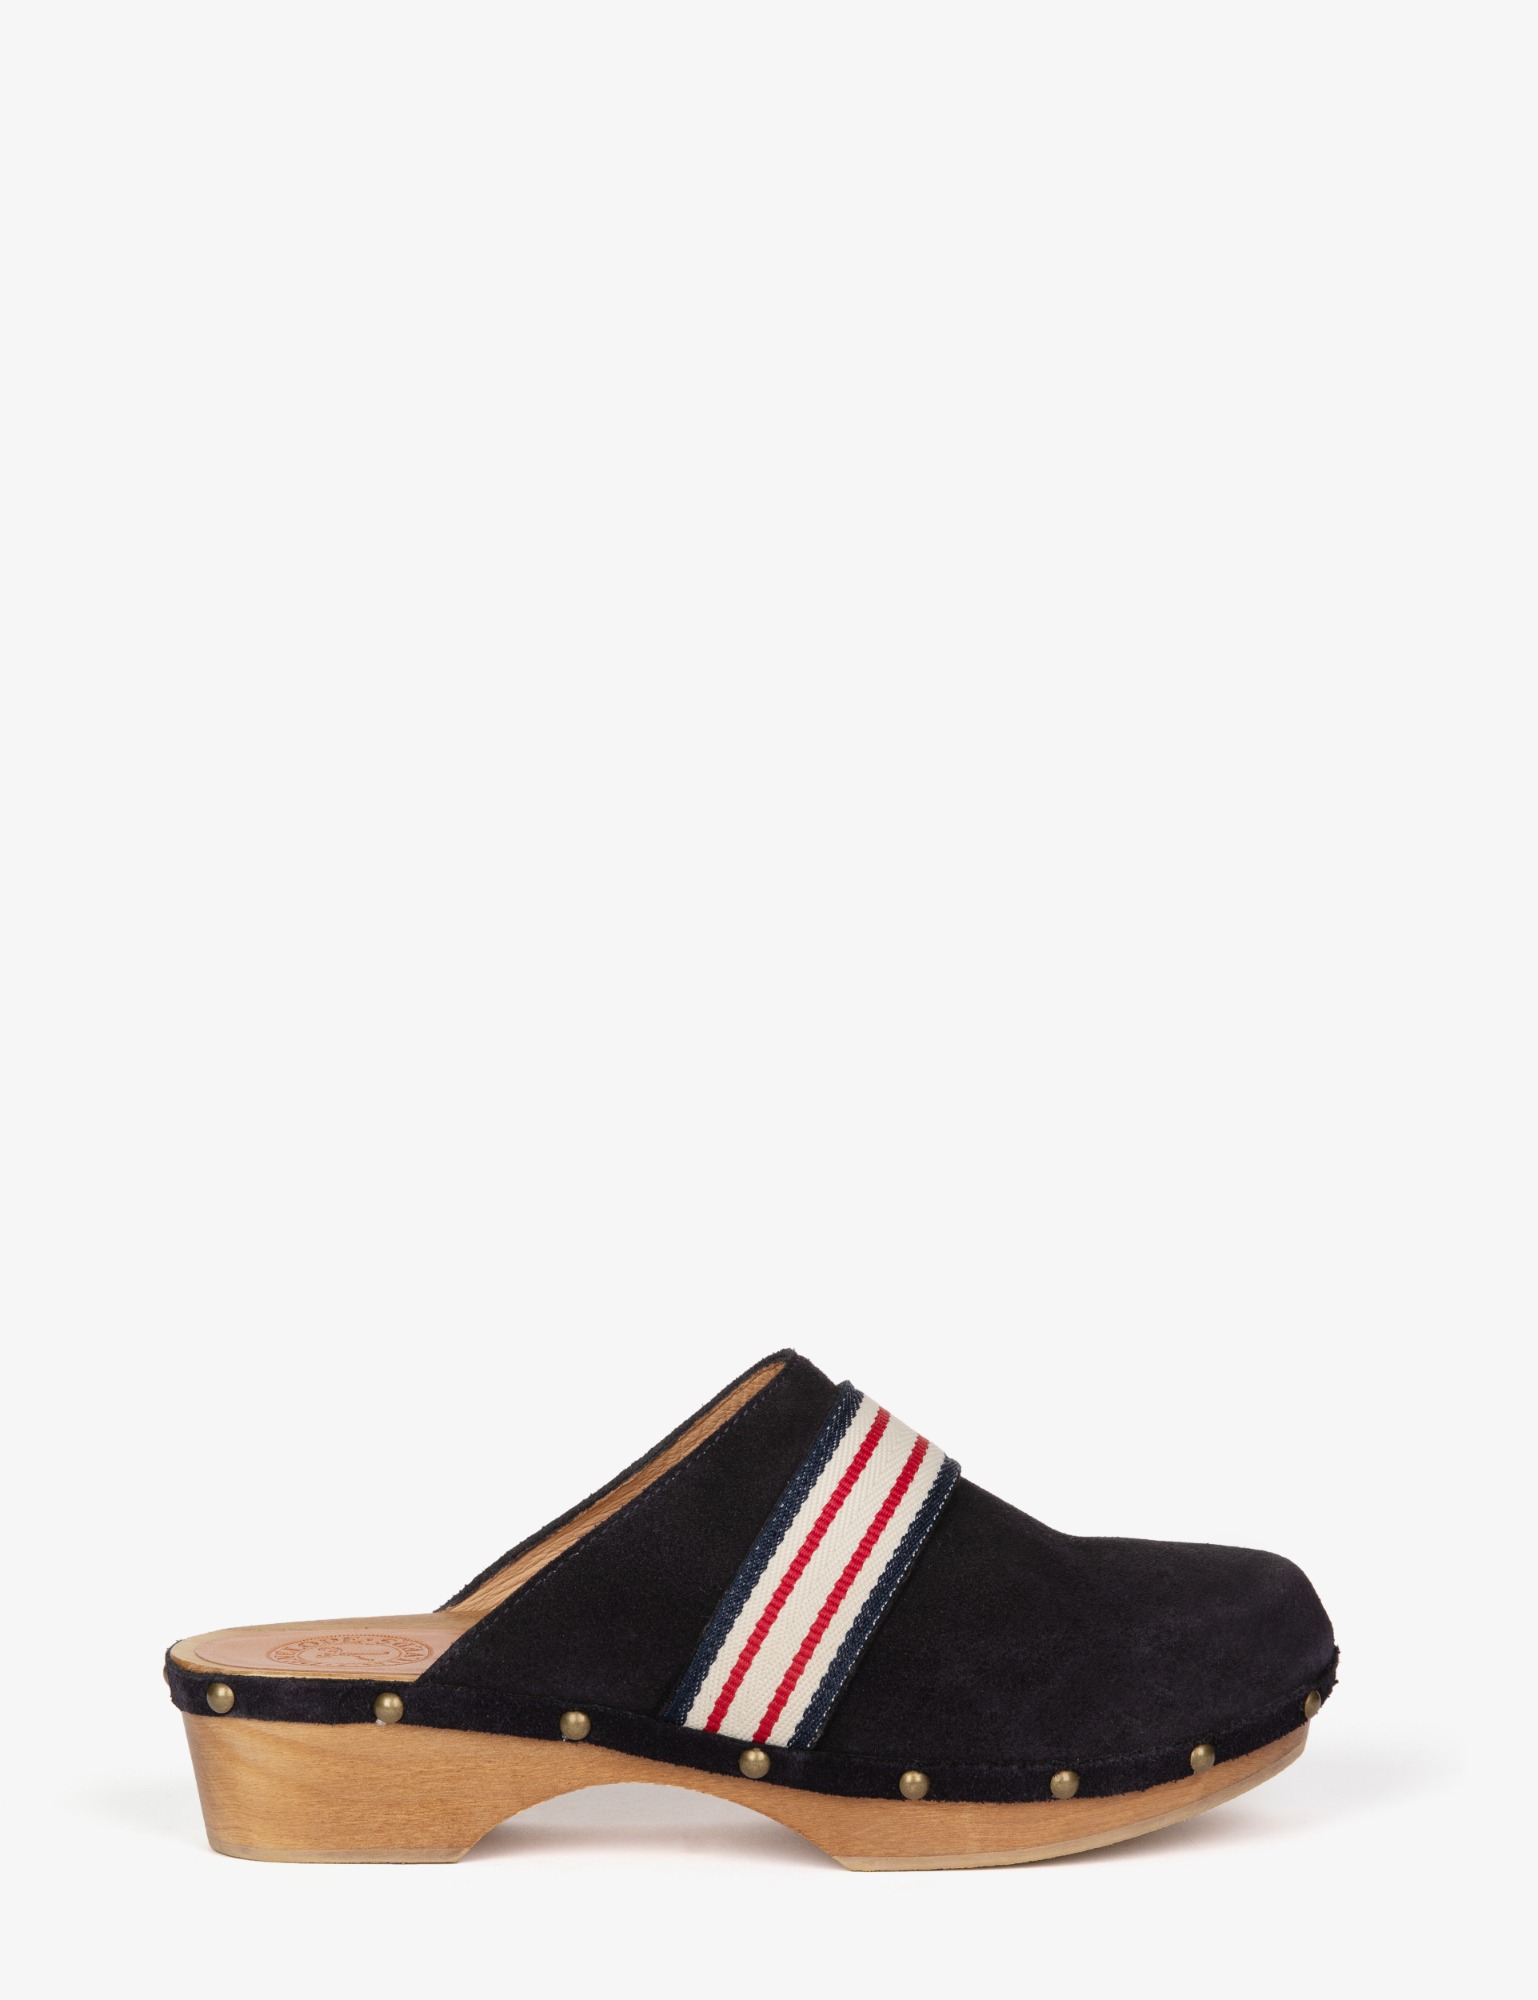 Discontinued-Low Suede Clog